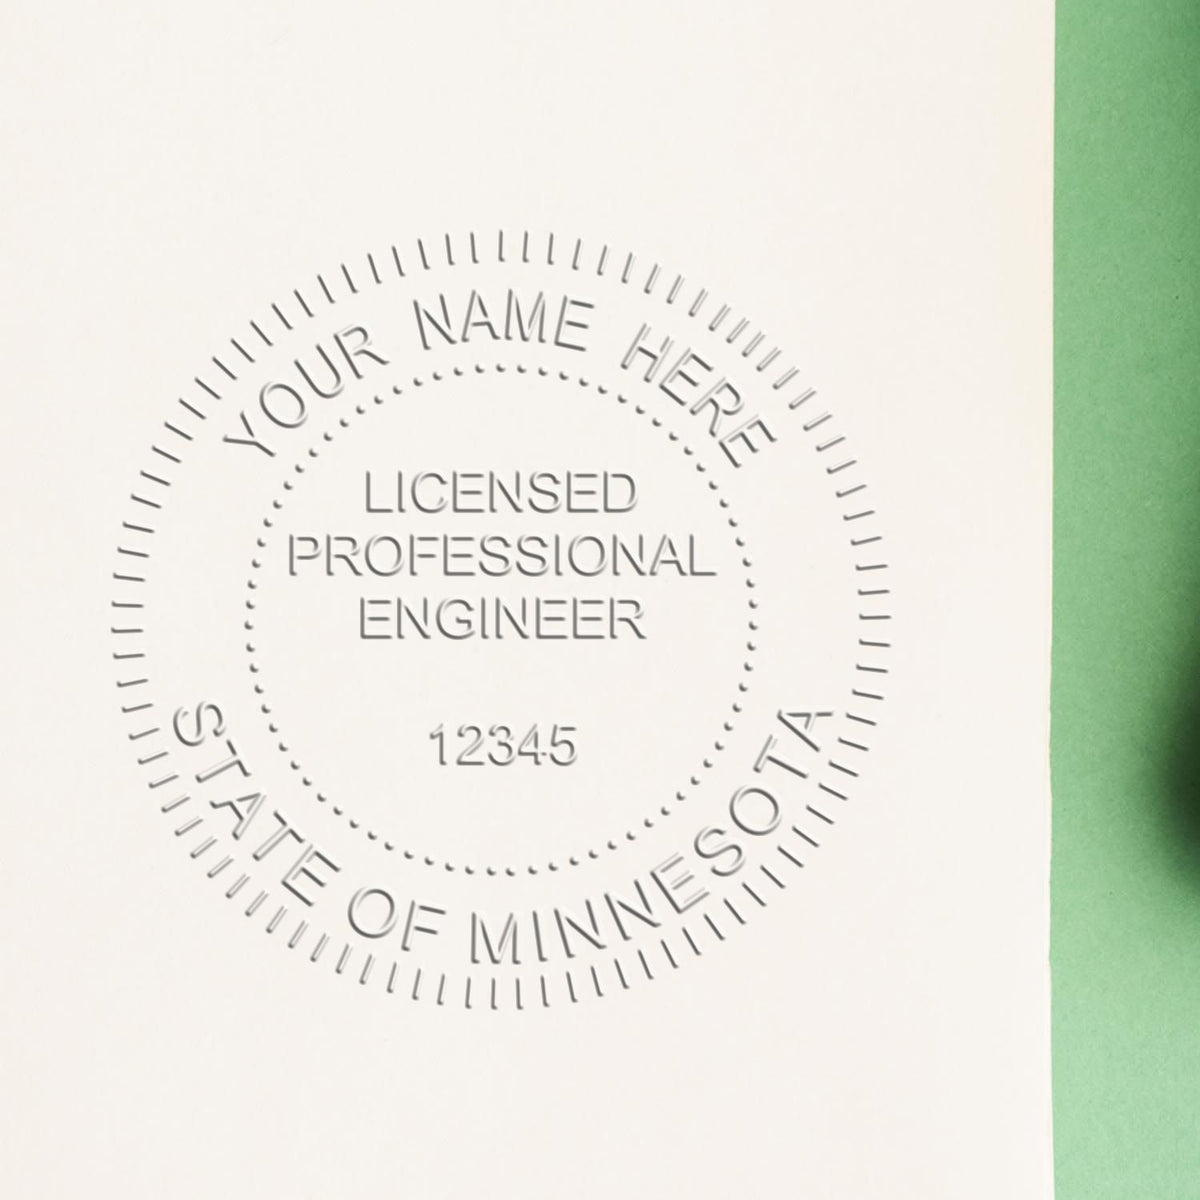 A stamped impression of the Minnesota Engineer Desk Seal in this stylish lifestyle photo, setting the tone for a unique and personalized product.